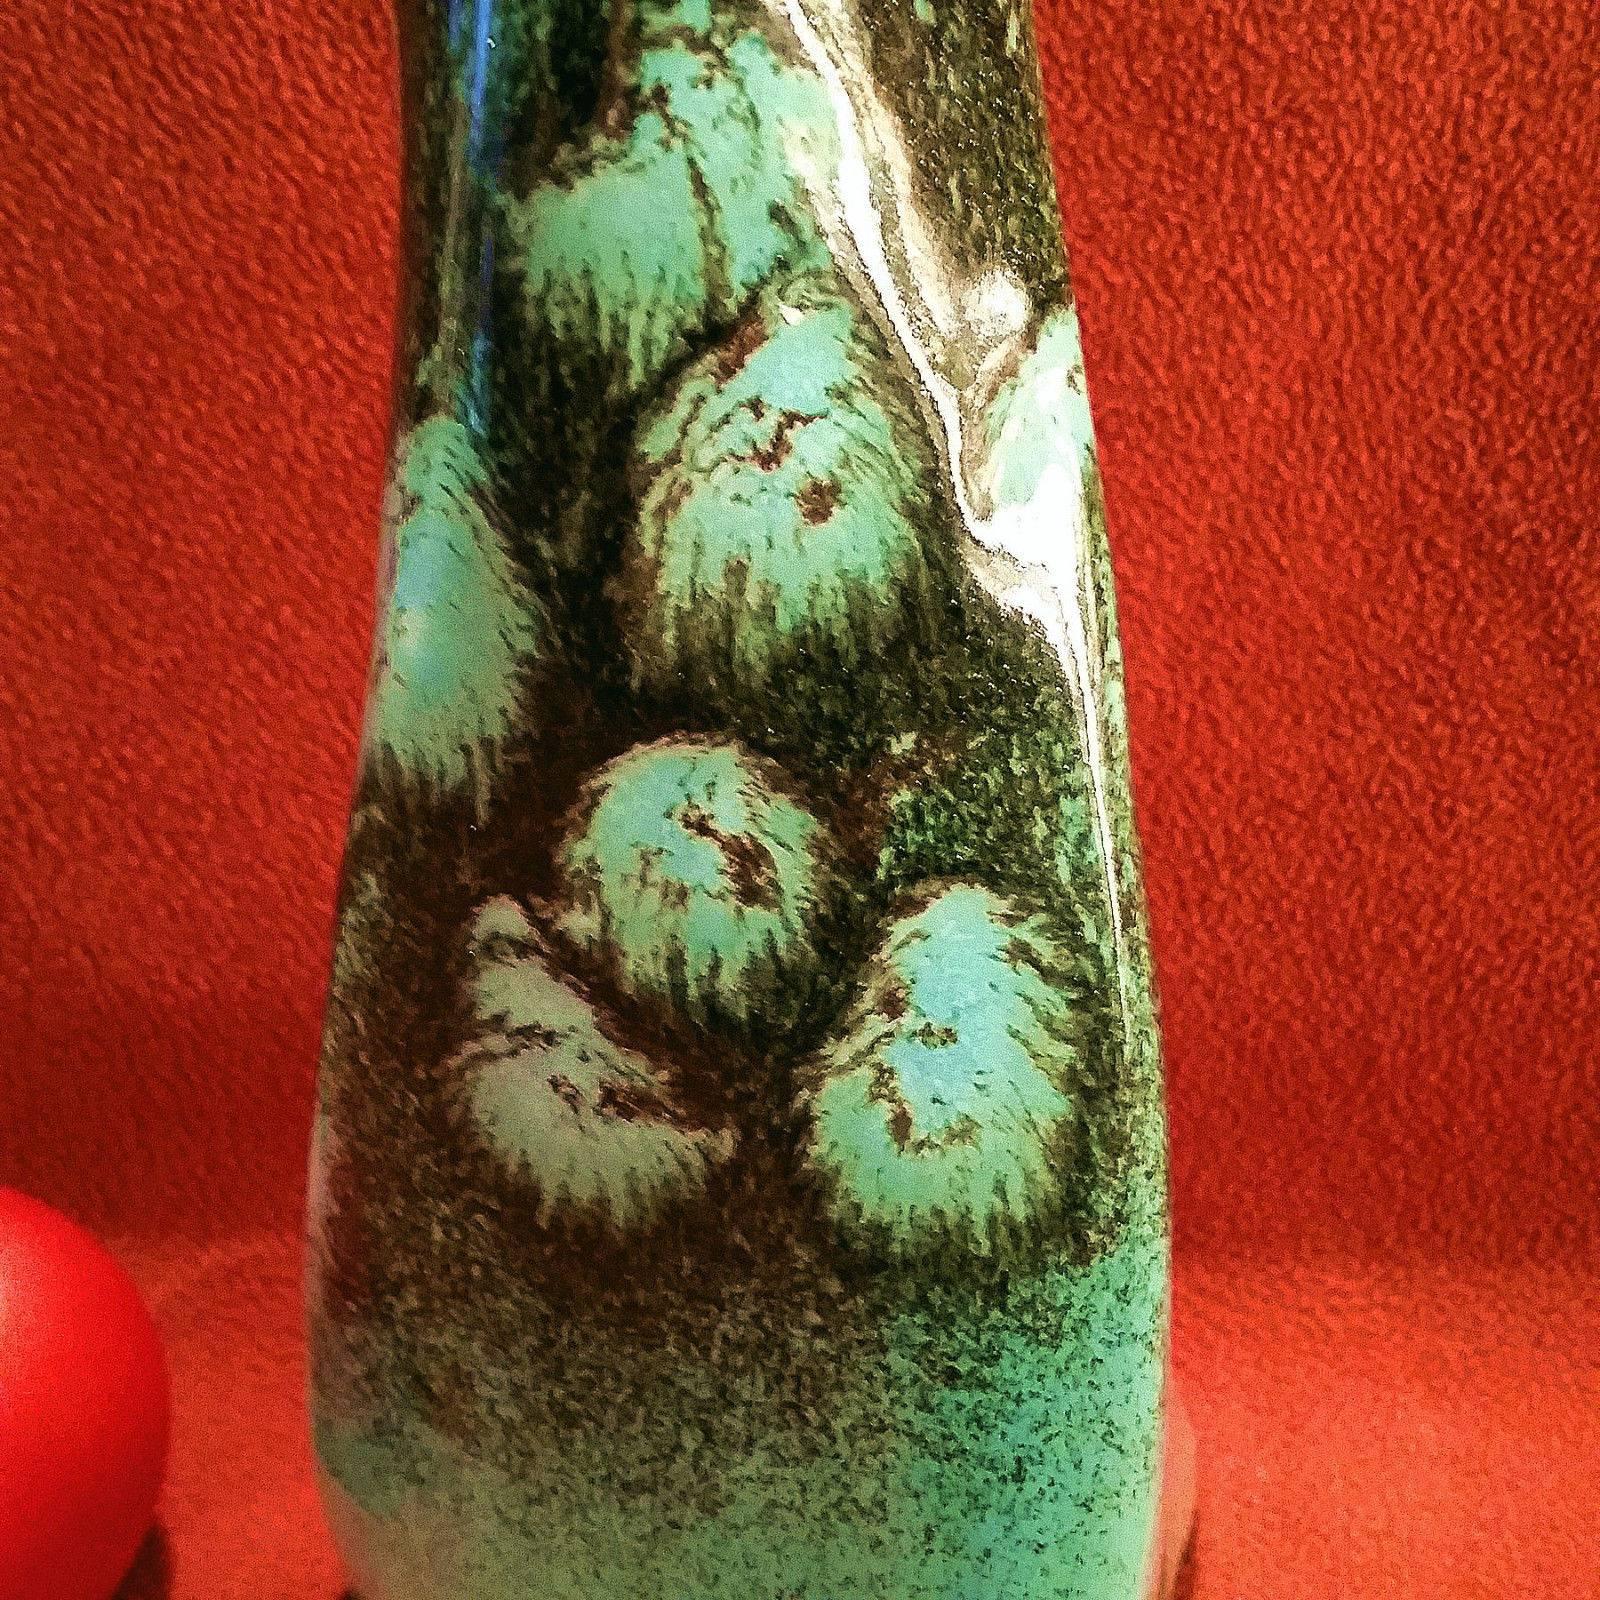 German Early Contemporary Handmade and Hand Glazed Twisted Vase with Flower Buds